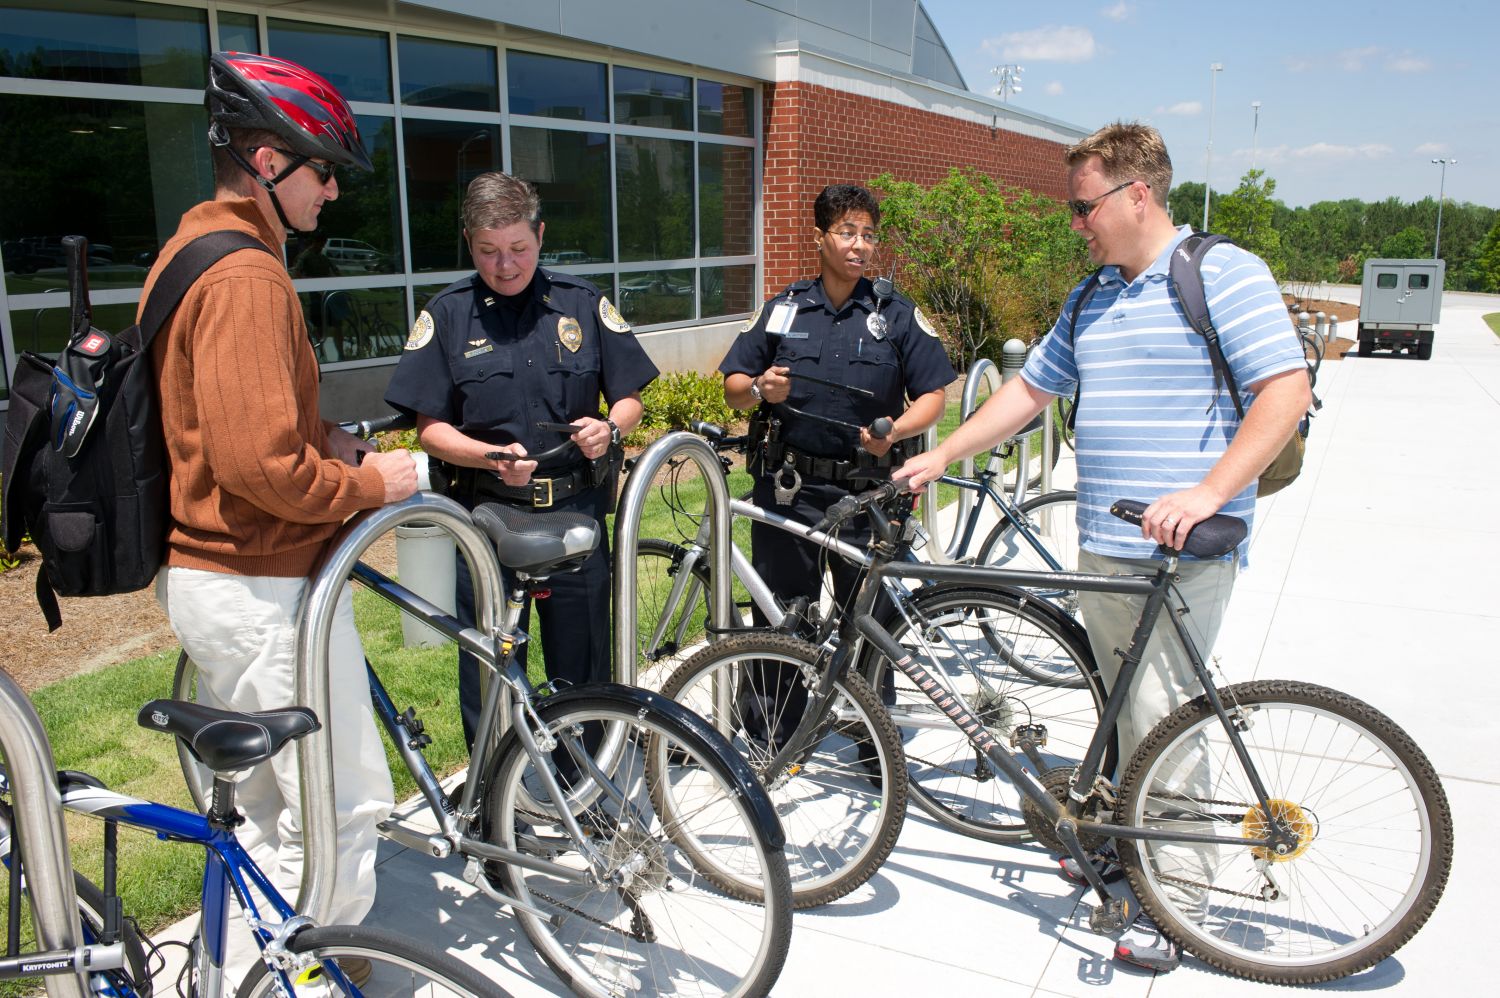 Georgia Tech police officers demonstrate the use of a U-lock to secure bikes